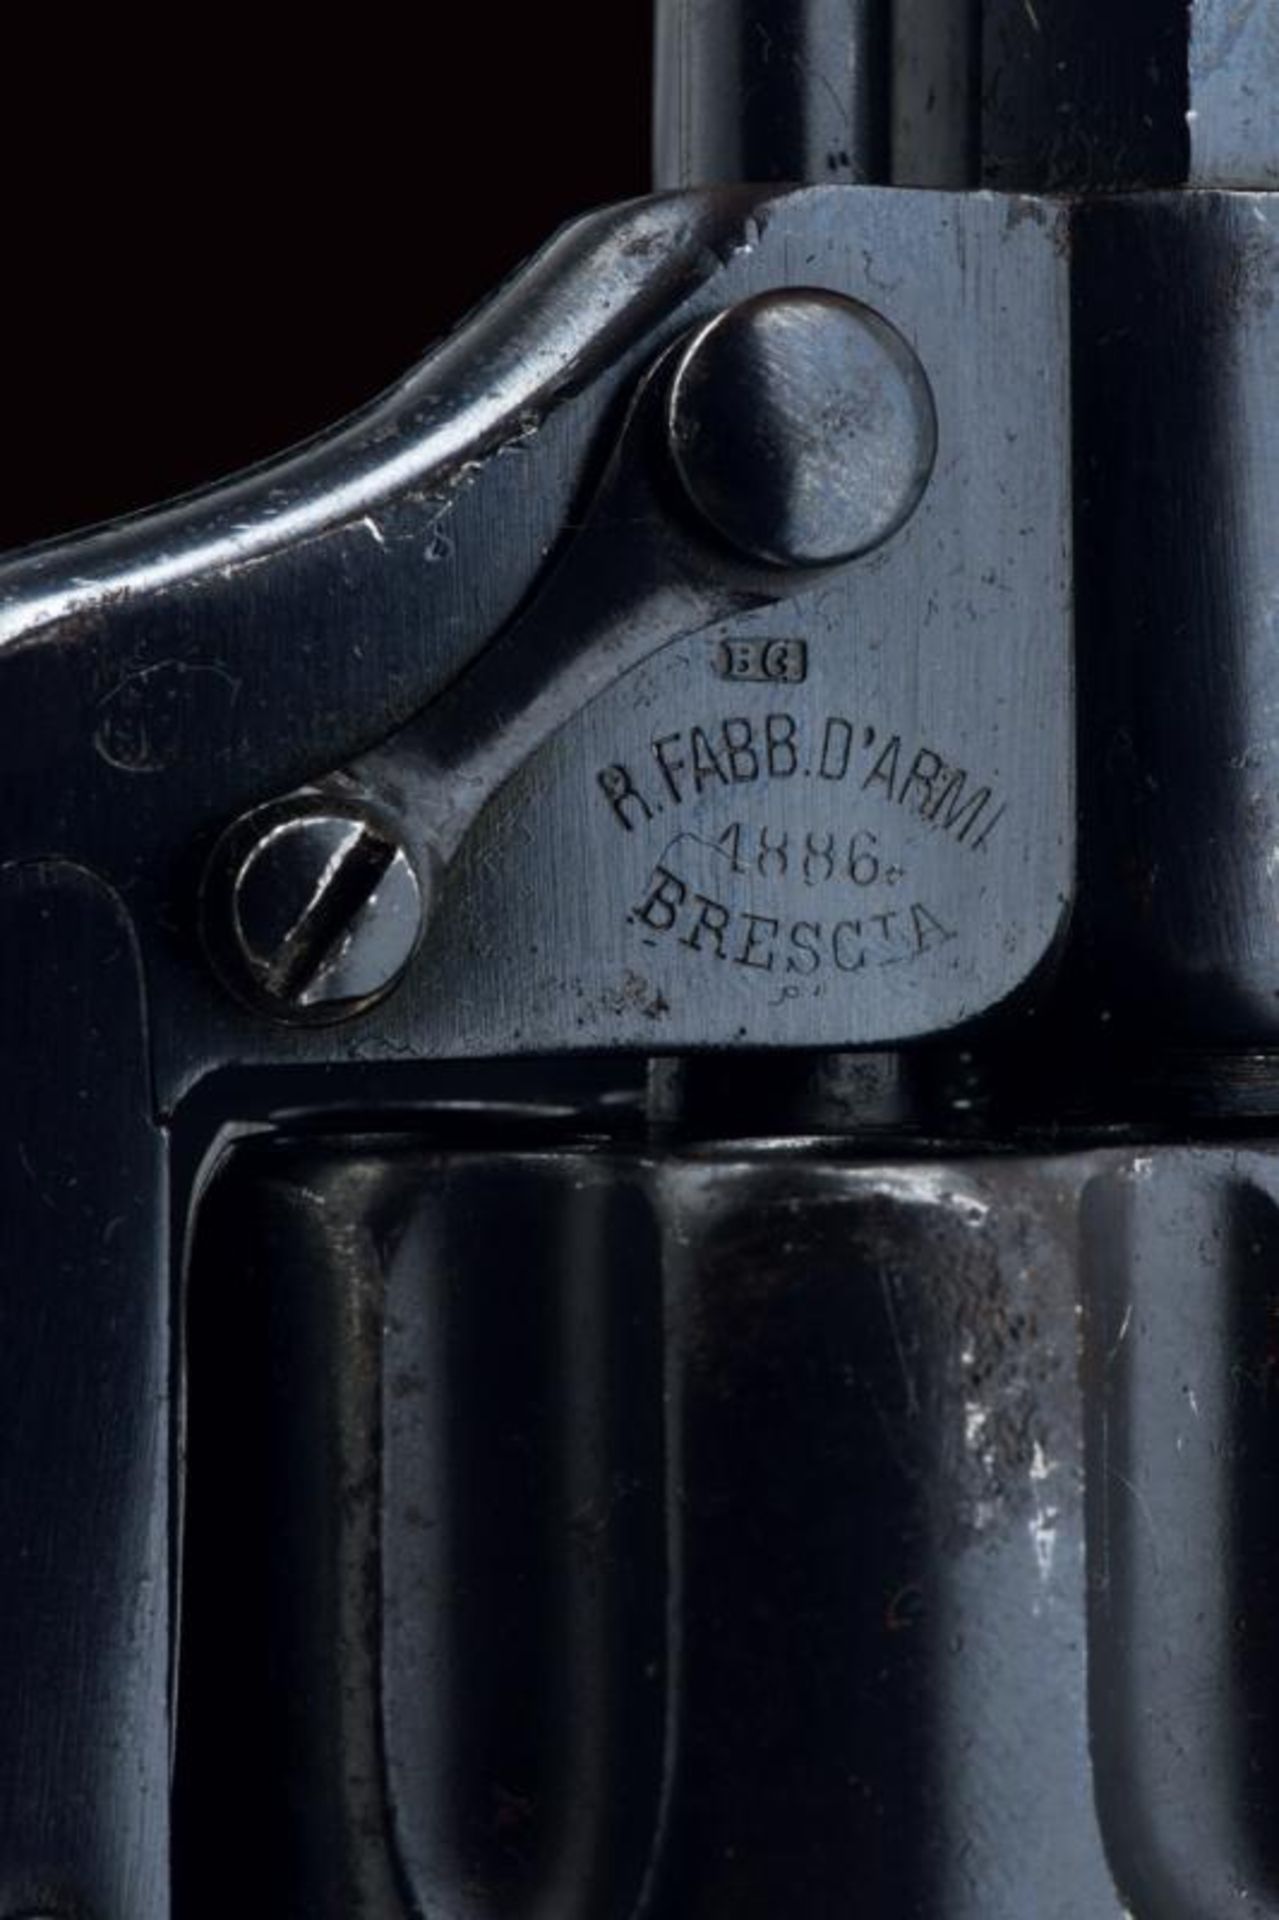 An 1874 model centerfire revolver by Brescian Royal Manufacture - Image 5 of 6